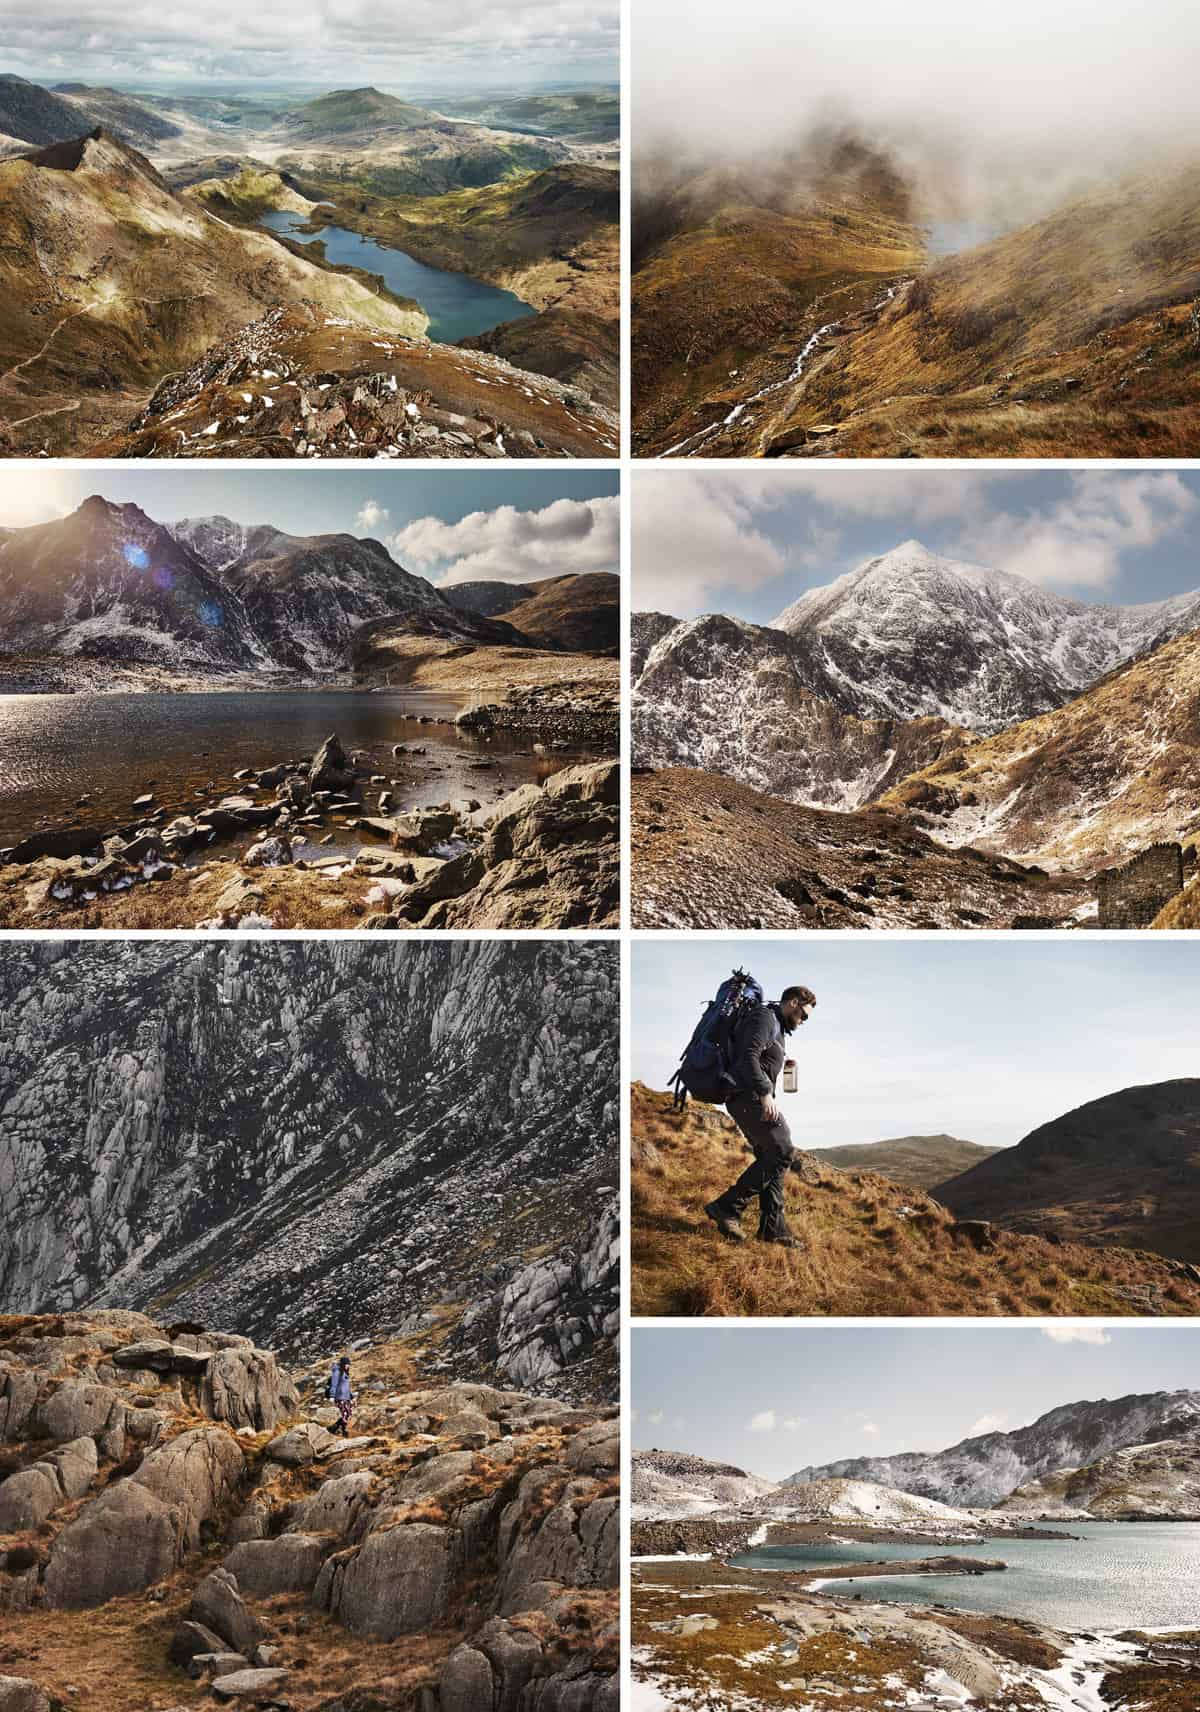 ID: Clockwise from left 1: A landscape image. Mount Snowdon from the summit - it is a clear day and there are lots of mountain tops, lakes and other hills visible. 2: A landscape image. A mountain detail of a waterfall on some rocky hills with cloud coming over the tops of the mountain. 3: A landscape image. A landscape facing Mount Snowdon pictured on a snow covered day - it is bright in the sky and the mountains look freshly covered. 4: A landscape image. Matt walks into the frame down the hill in this mountain scene. He is wearing black boots, trousers, top and a large bag. He is wearing a bottle on his front. It is a clear day and the mountains are very visible. 5: A landscape image. the Ogwen Valley pictured with a fresh coat of snow, it is a clear day with browns and greens visible from the mountains. 6: A portrait image. Fay is pictured walking in the midst of mountain rocks. In the foreground there is contrast with the brown rocks compared to the grey scree of the background. 7: A landscape image. the Ogwen Valley pictured with a fresh coat of snow, it is a clear day with browns and greens visible from the mountains.